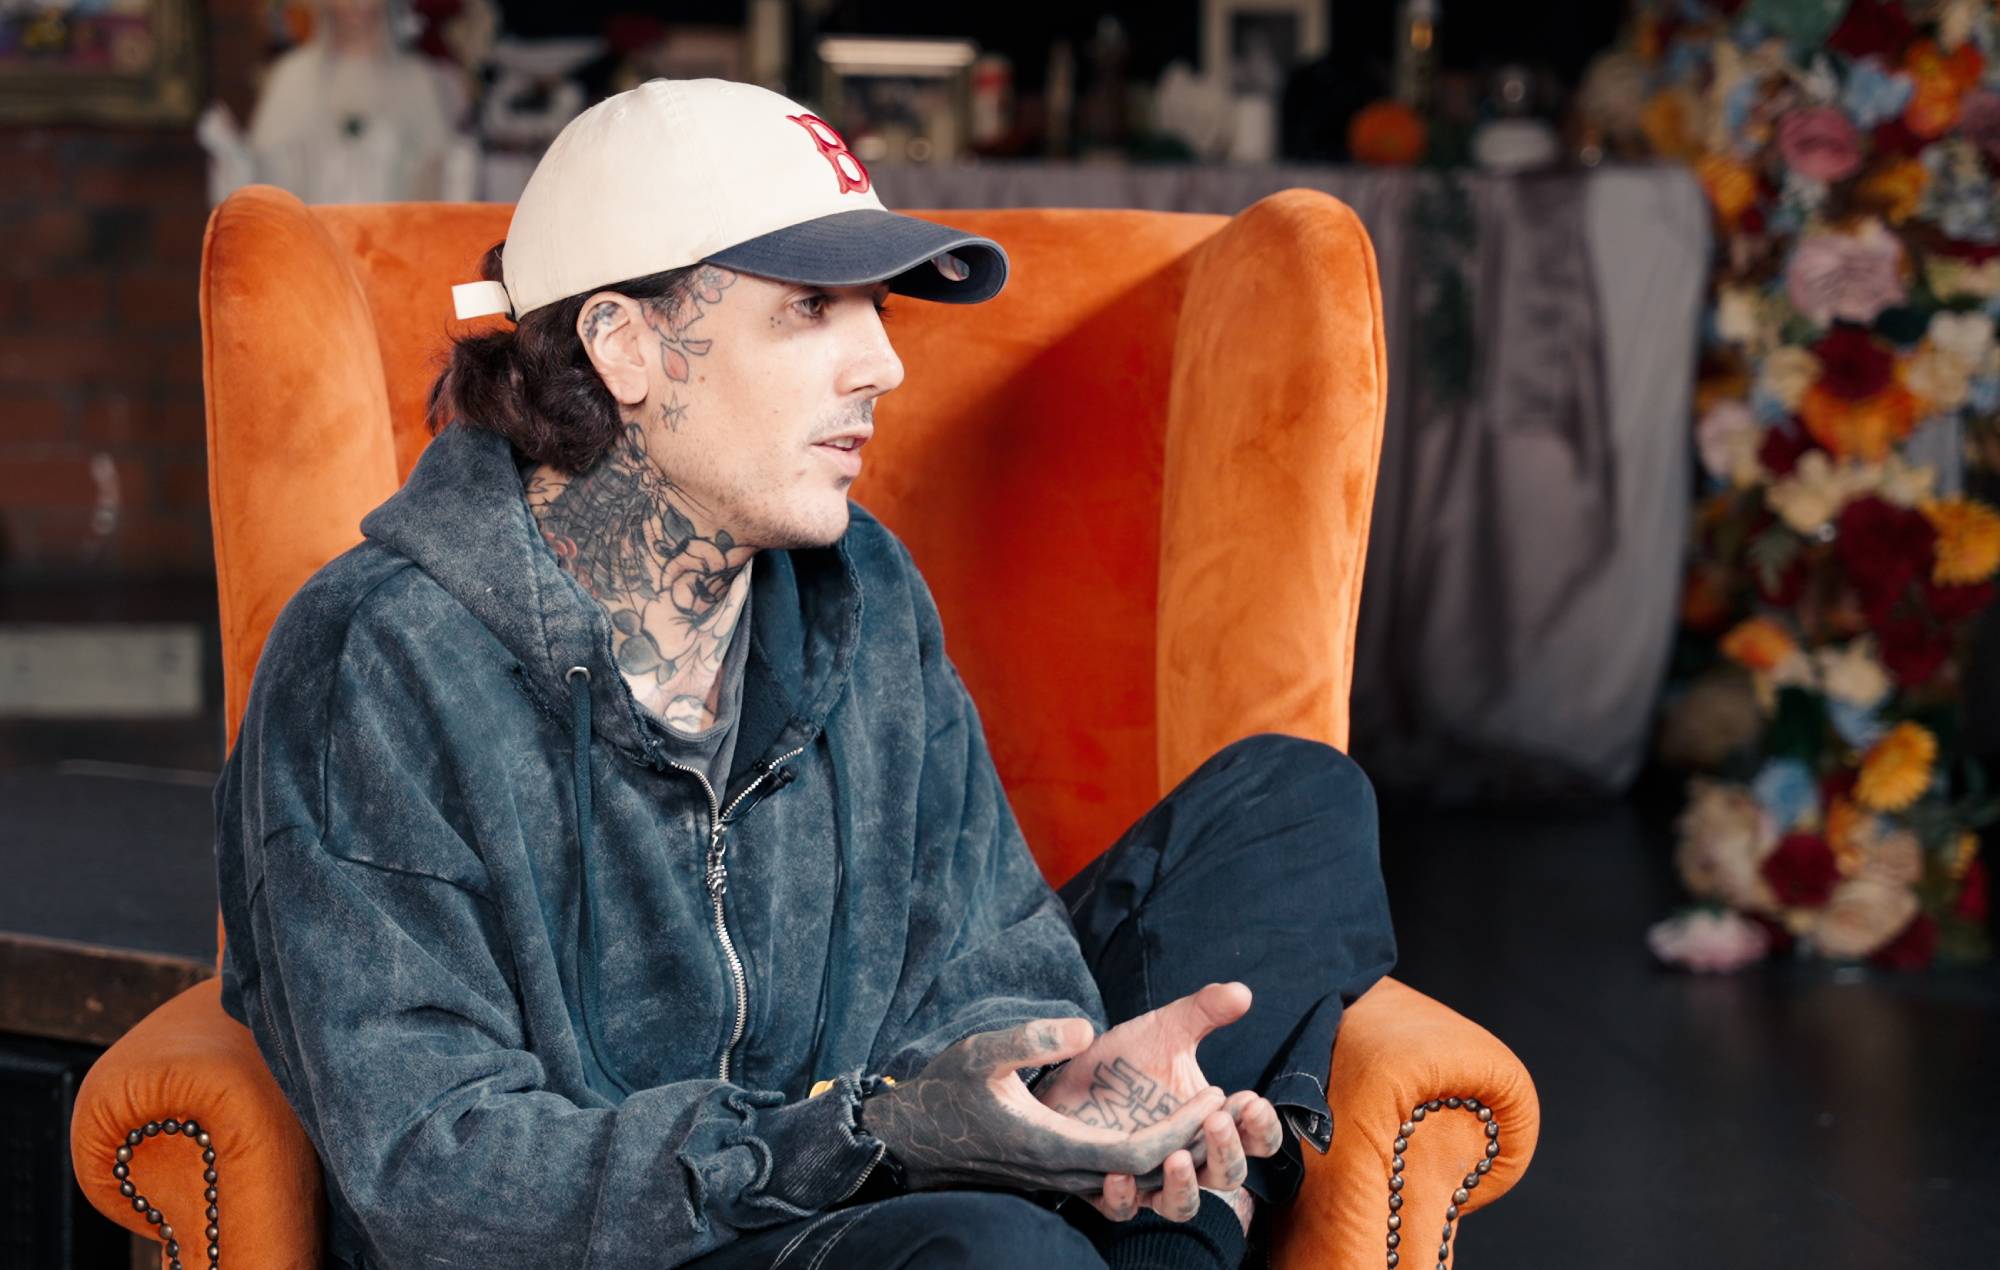 Bring Me The Horizon's Oli Sykes talks to NME at The Church in Sheffield. Credit: NME